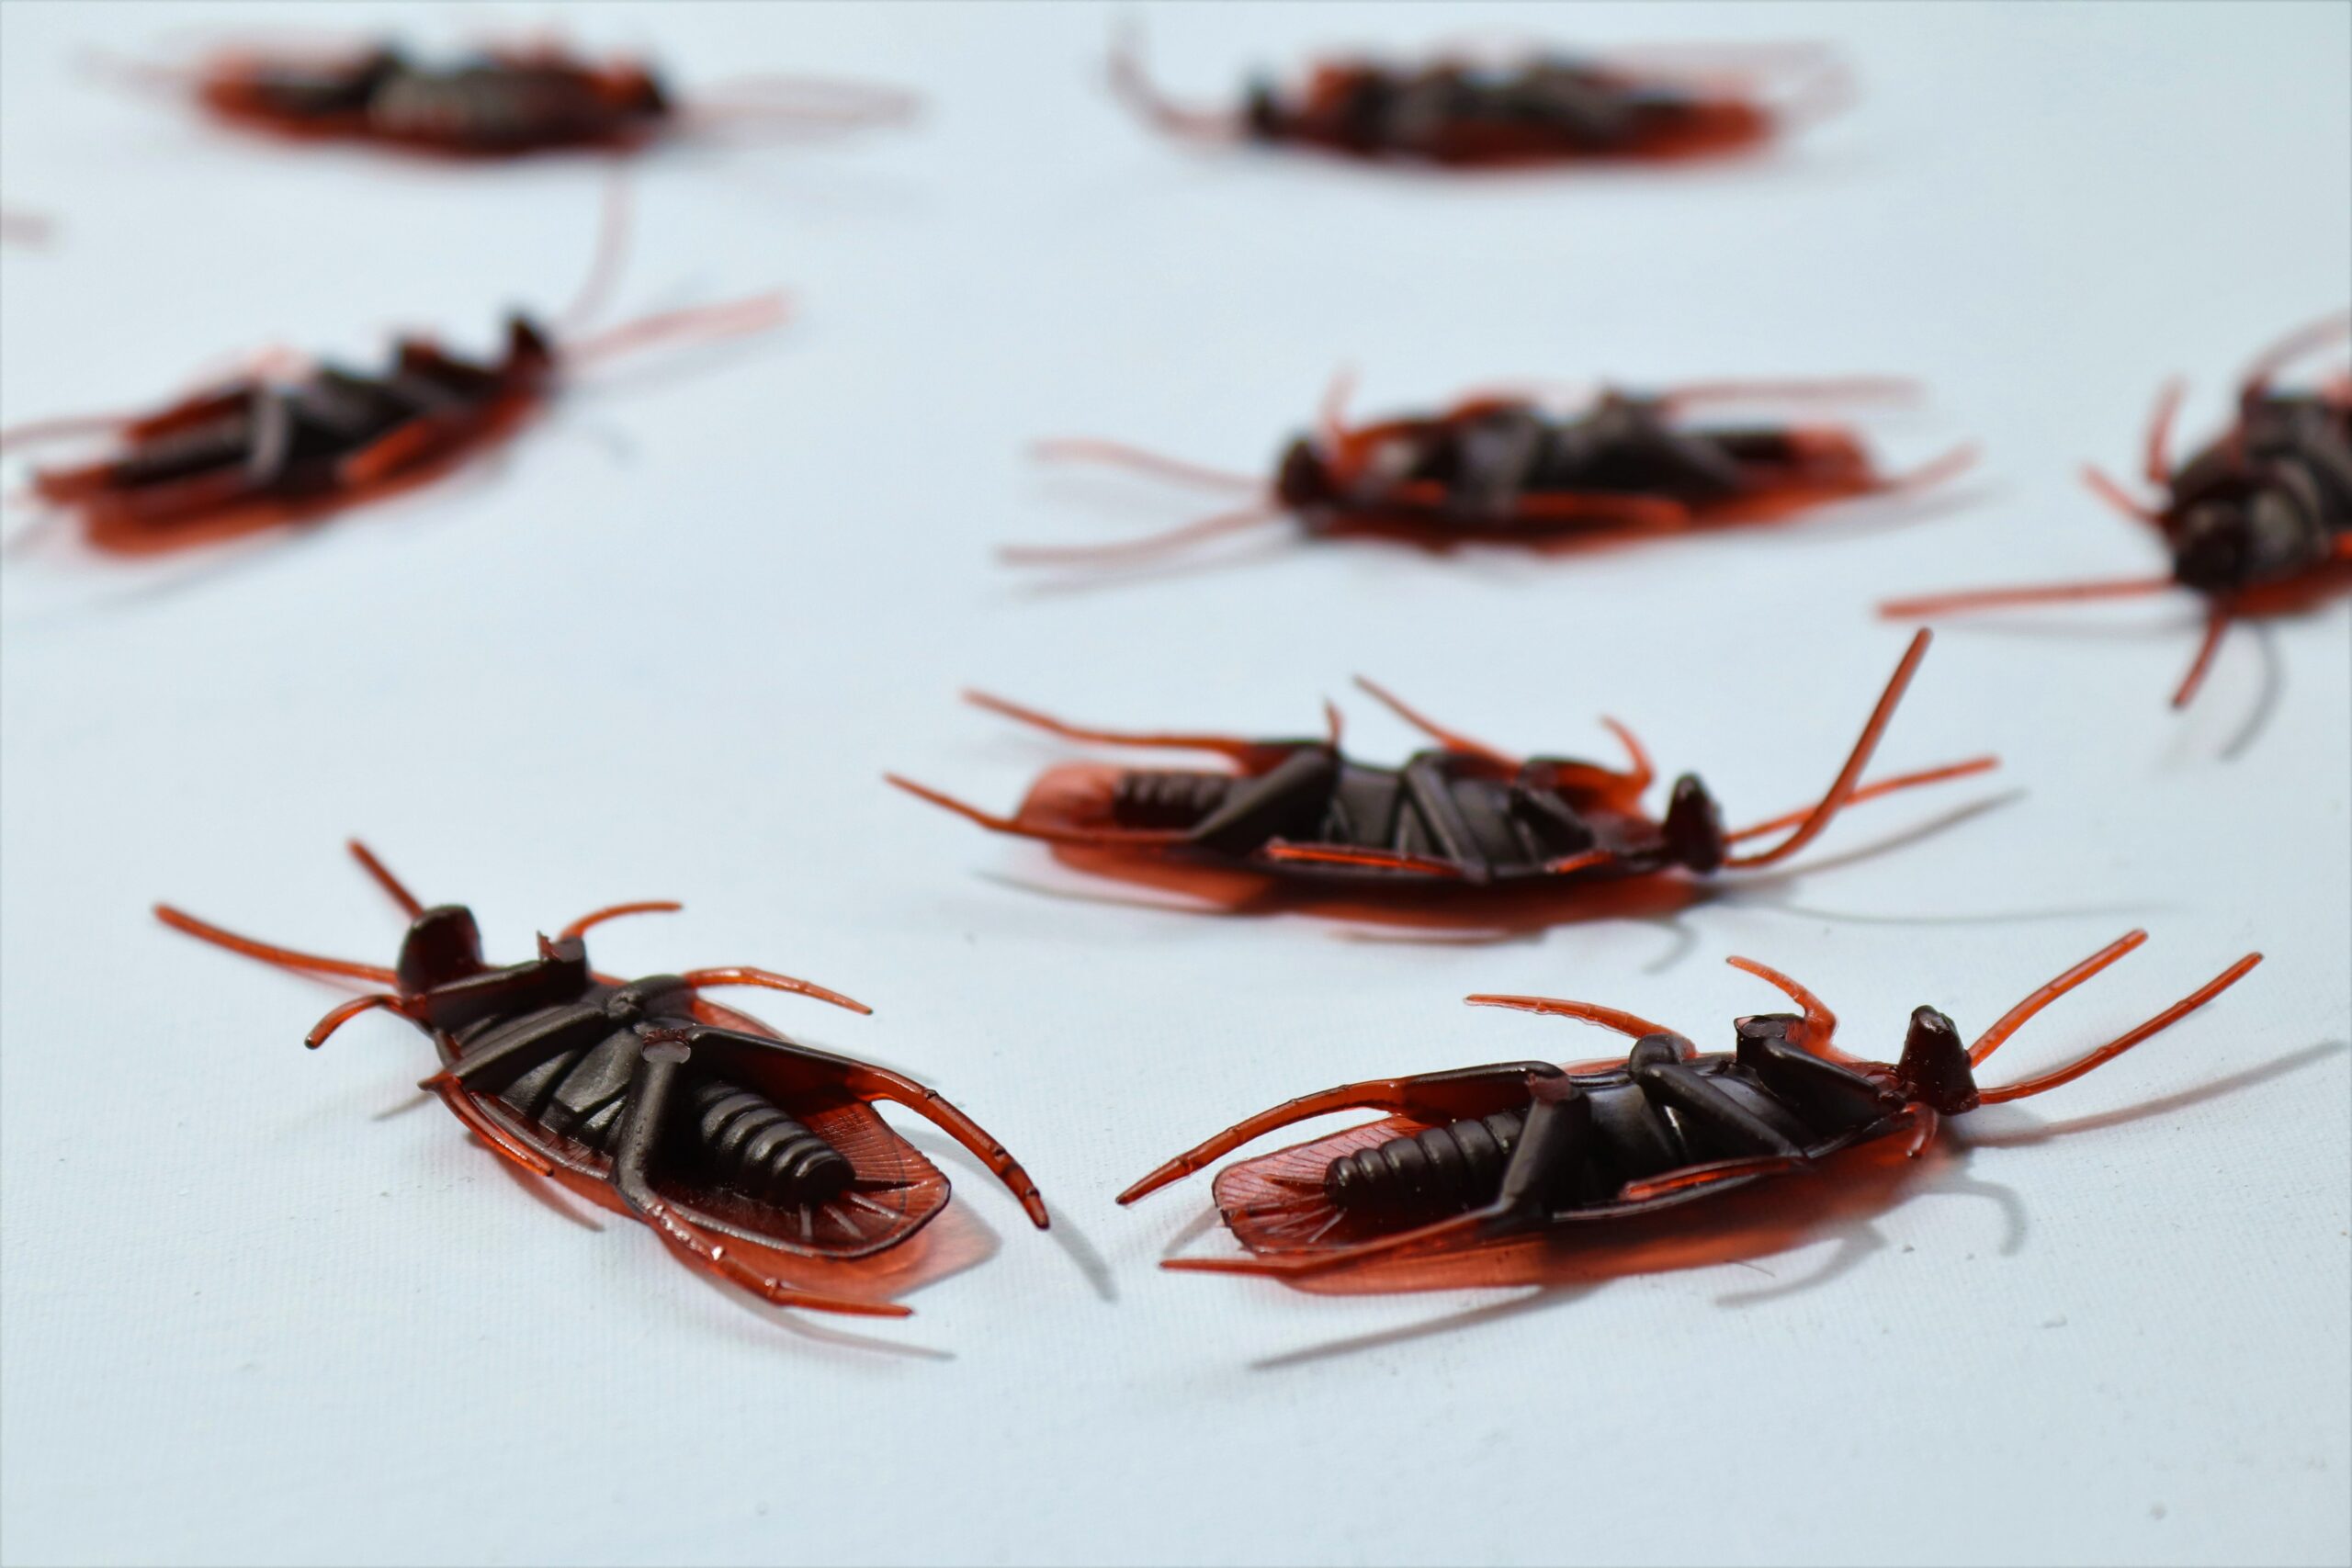 Are Roaches Common in Hawaii? And Other Gross Roach Questions Answered!